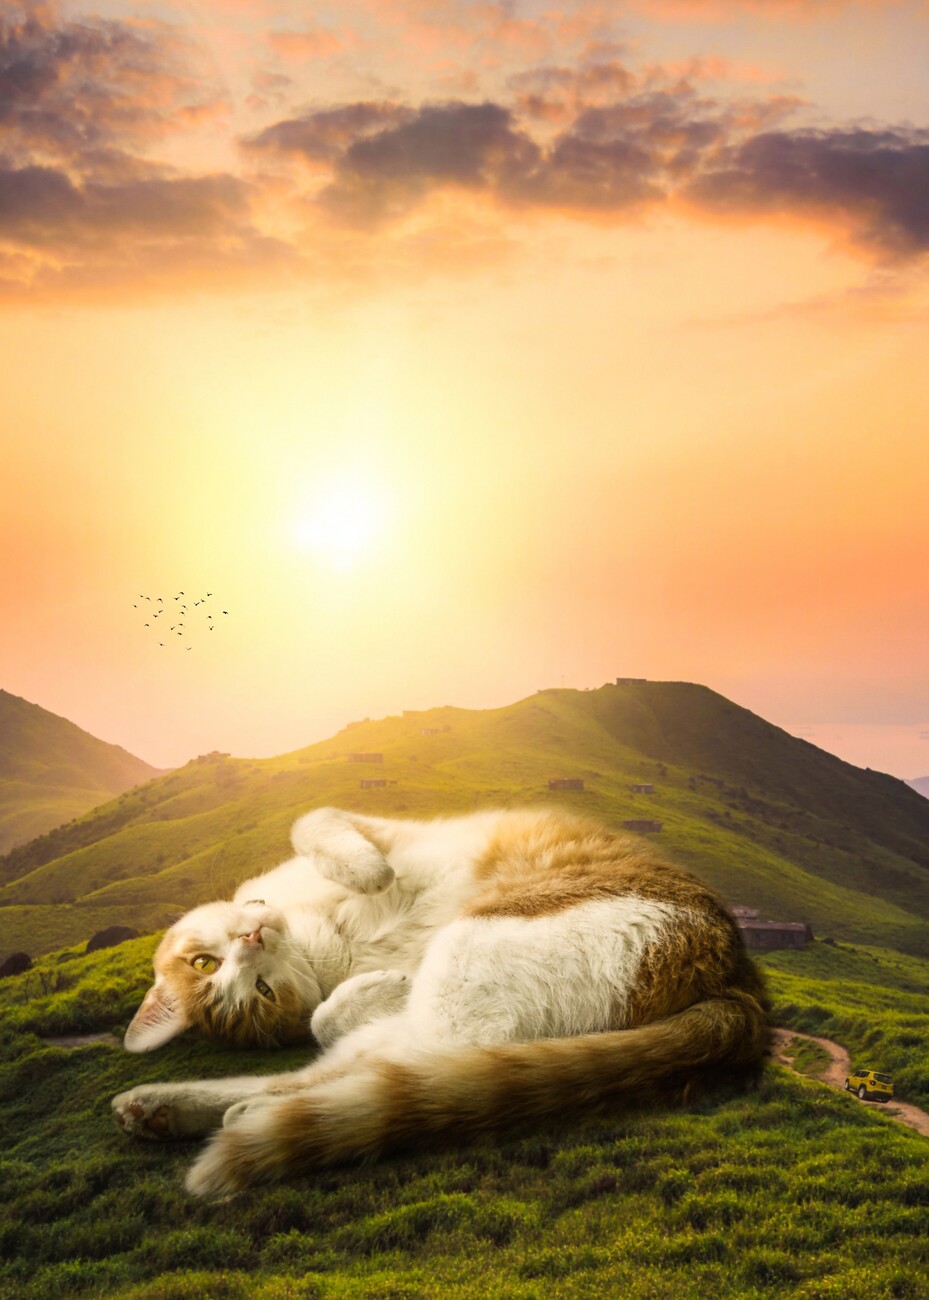 The Morning Cat Poster Print